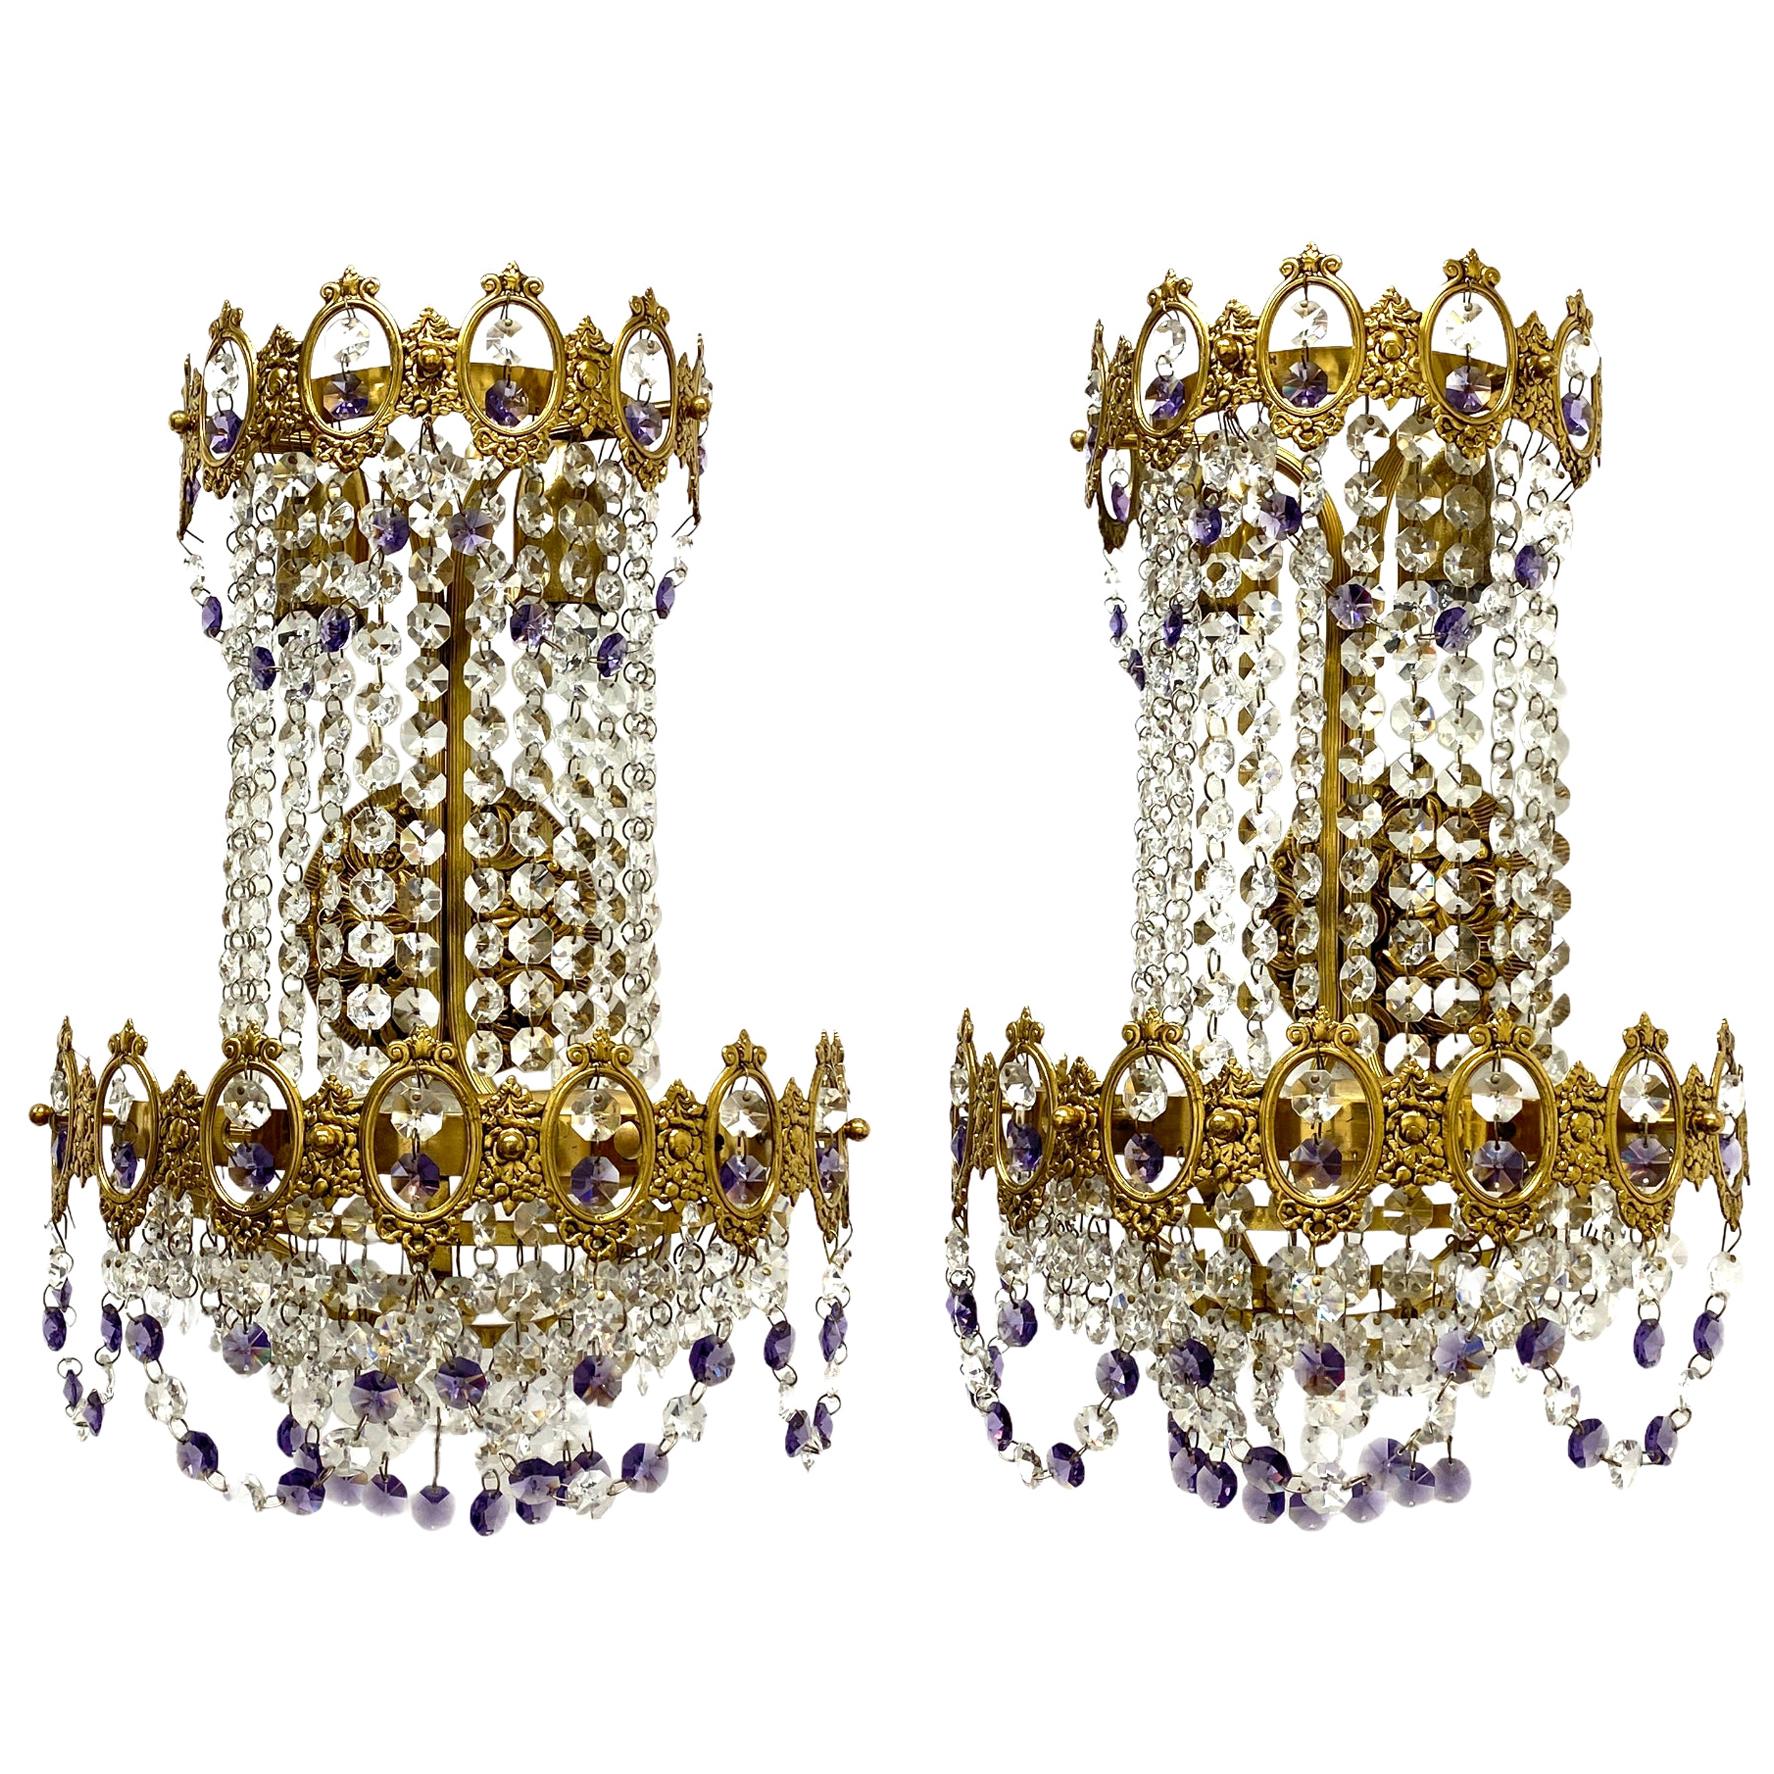 Pair of Monumental Empire Style Crystal and Bronze Sconces, Austria, 1930s